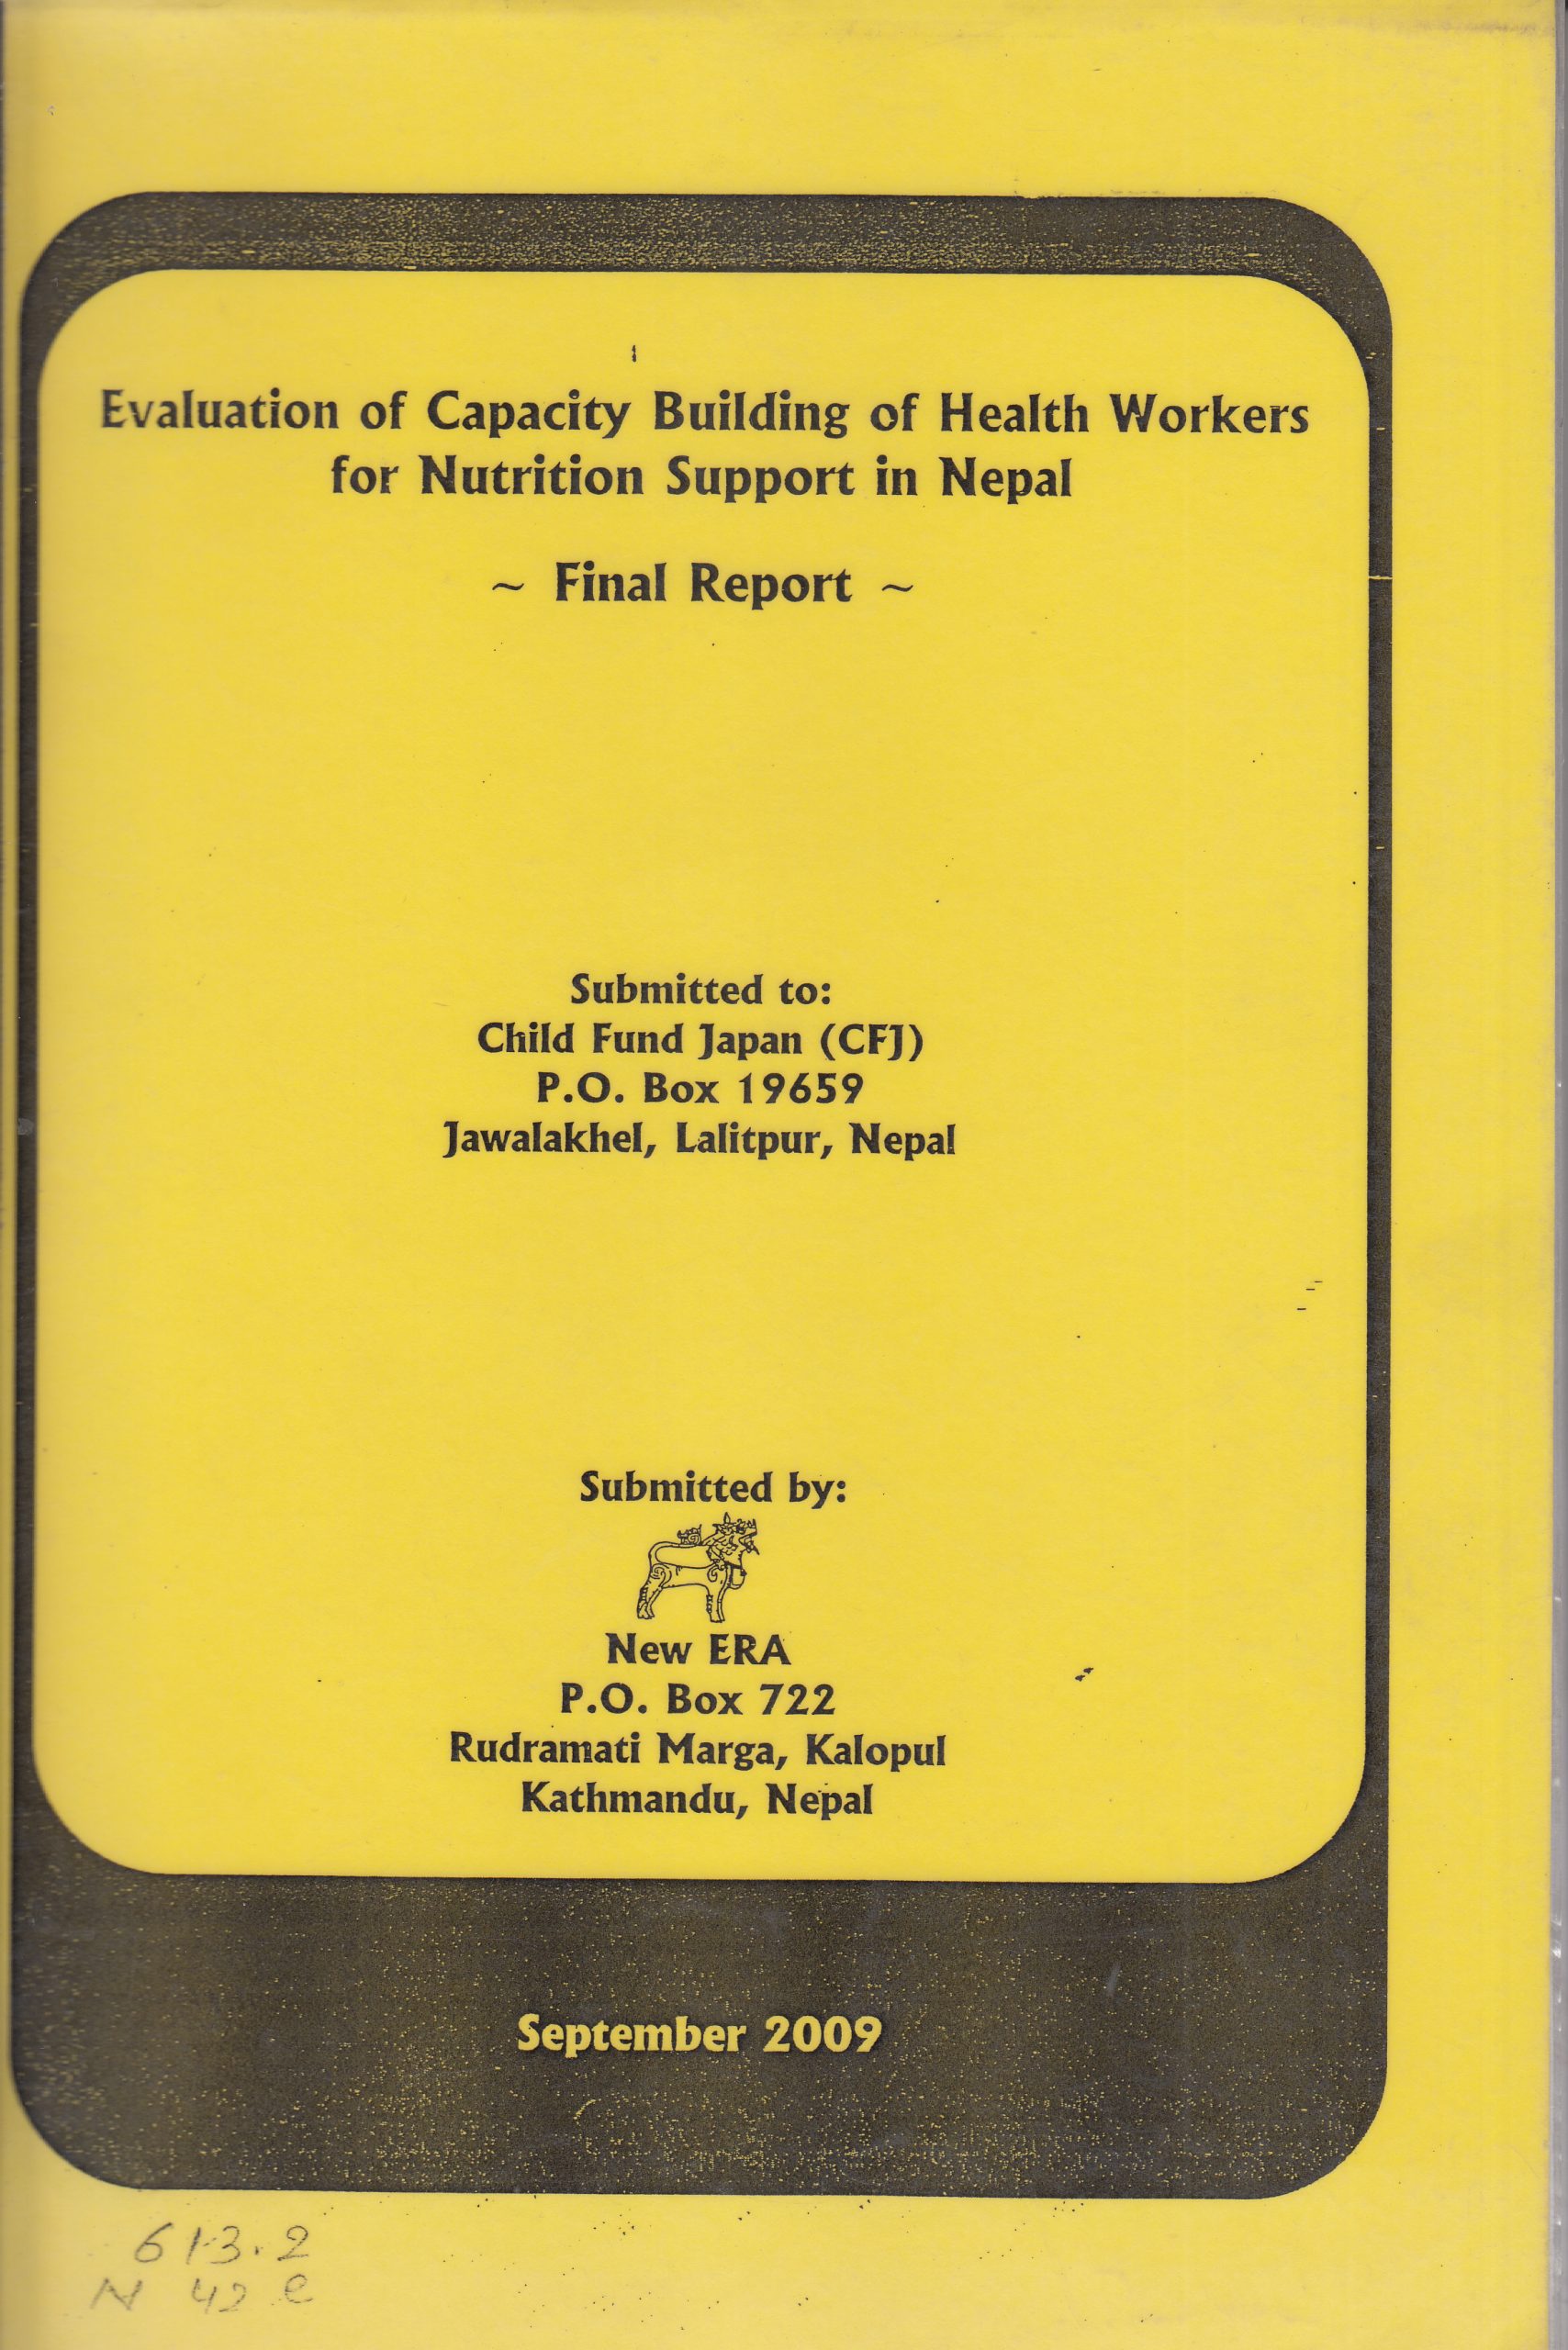 Evaluation on Capacity Building of Health Workers for Nutrition Support in Nepal